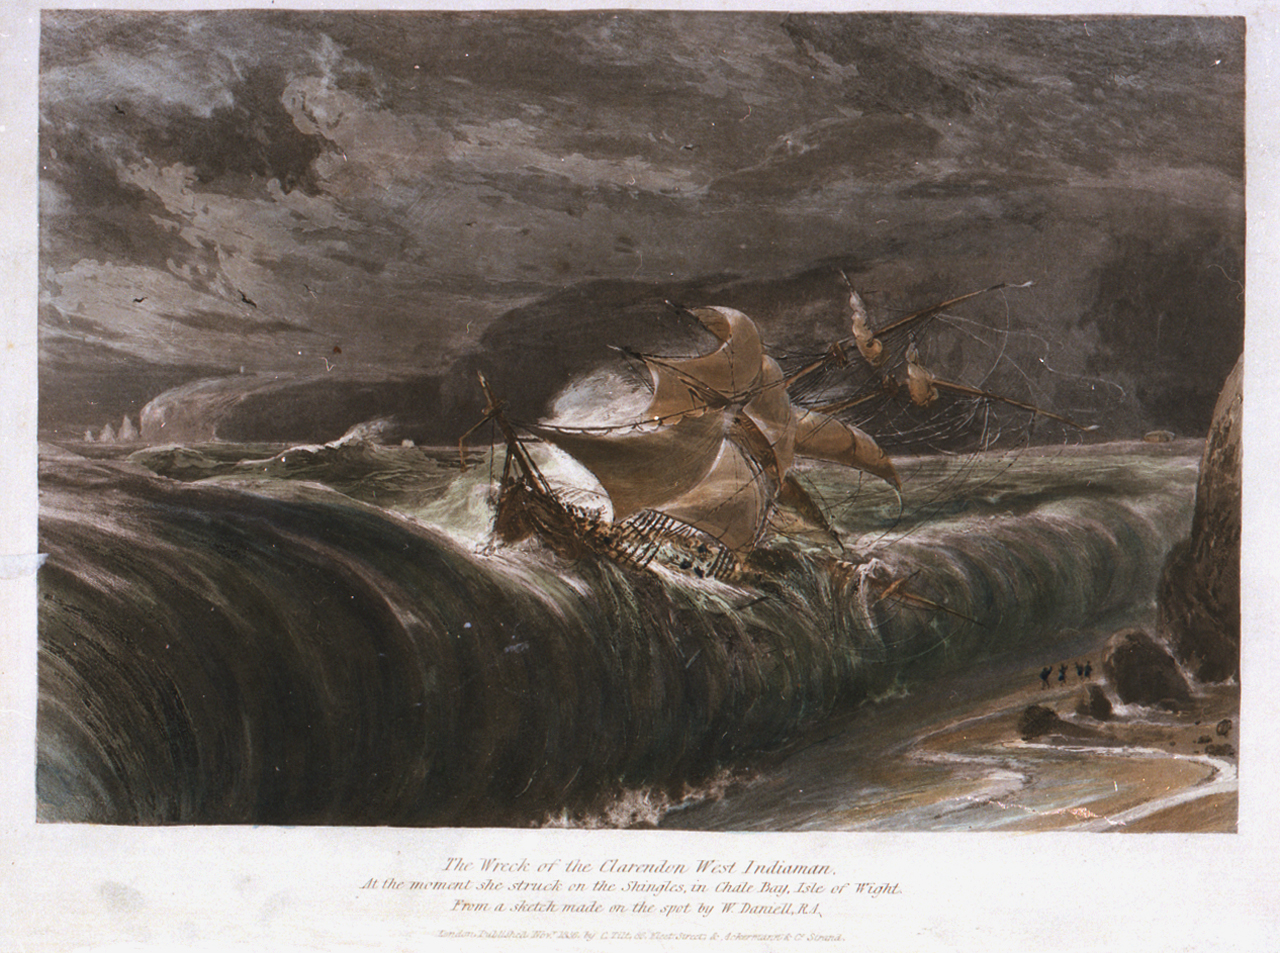 'The Wreck of the Clarendon West Indiaman, At the moment she
              struck on the Shingles, in Chale Bay, Isle of Wight', From a sketch made on the spot by W Daniell, R.A, 1836, Royal
            Museums Greenwich